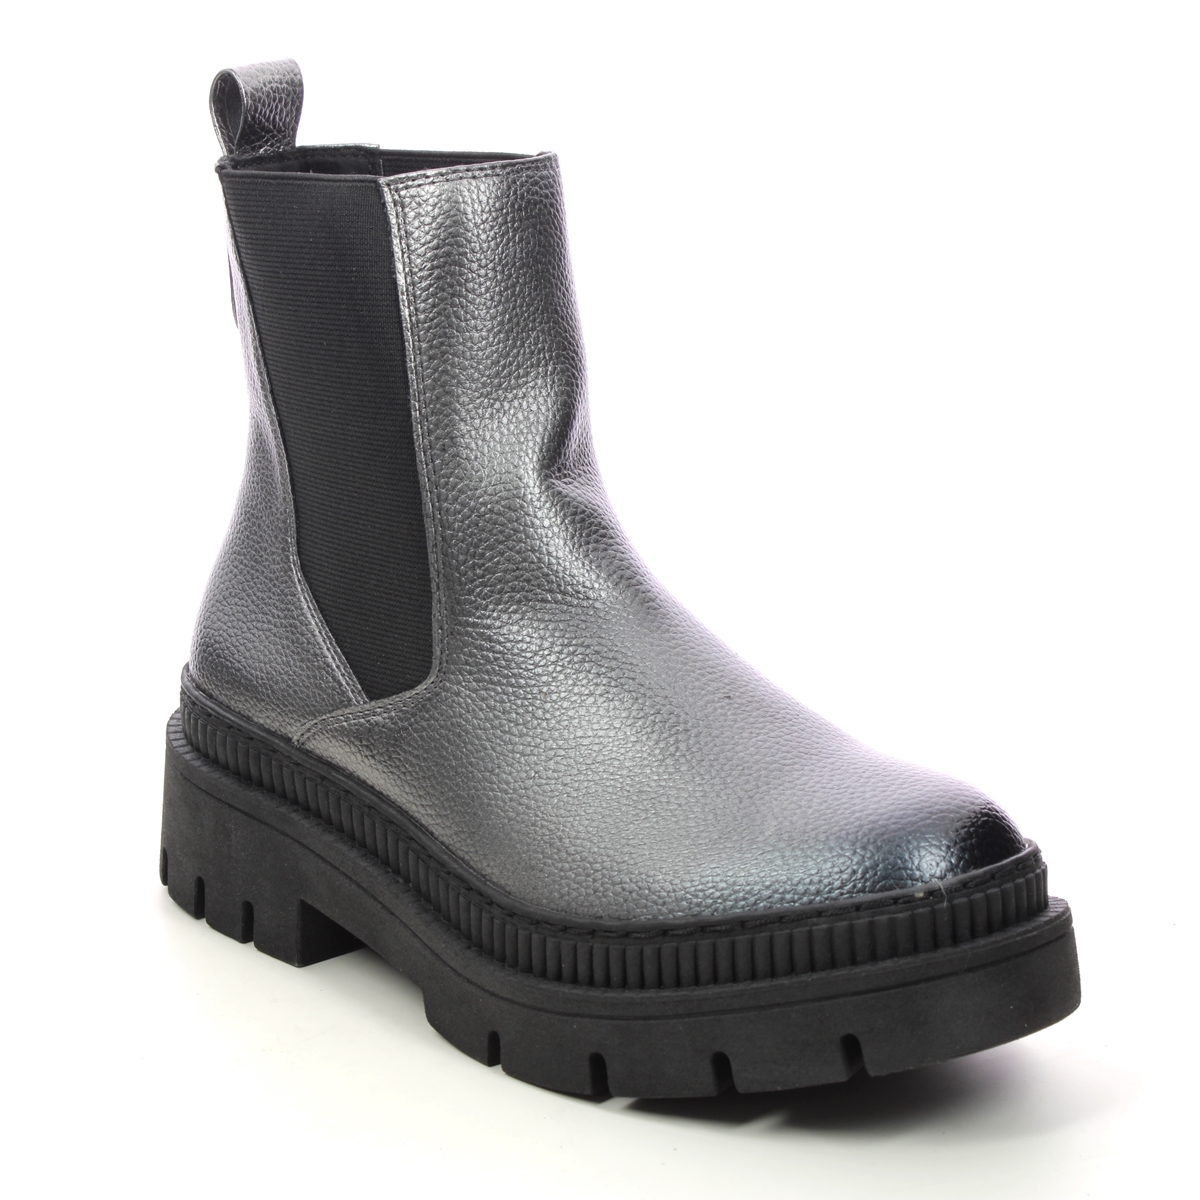 Marco Tozzi Rostra Chelsea Pewter Womens Chelsea Boots 25822-41-915 In Size 39 In Plain Pewter